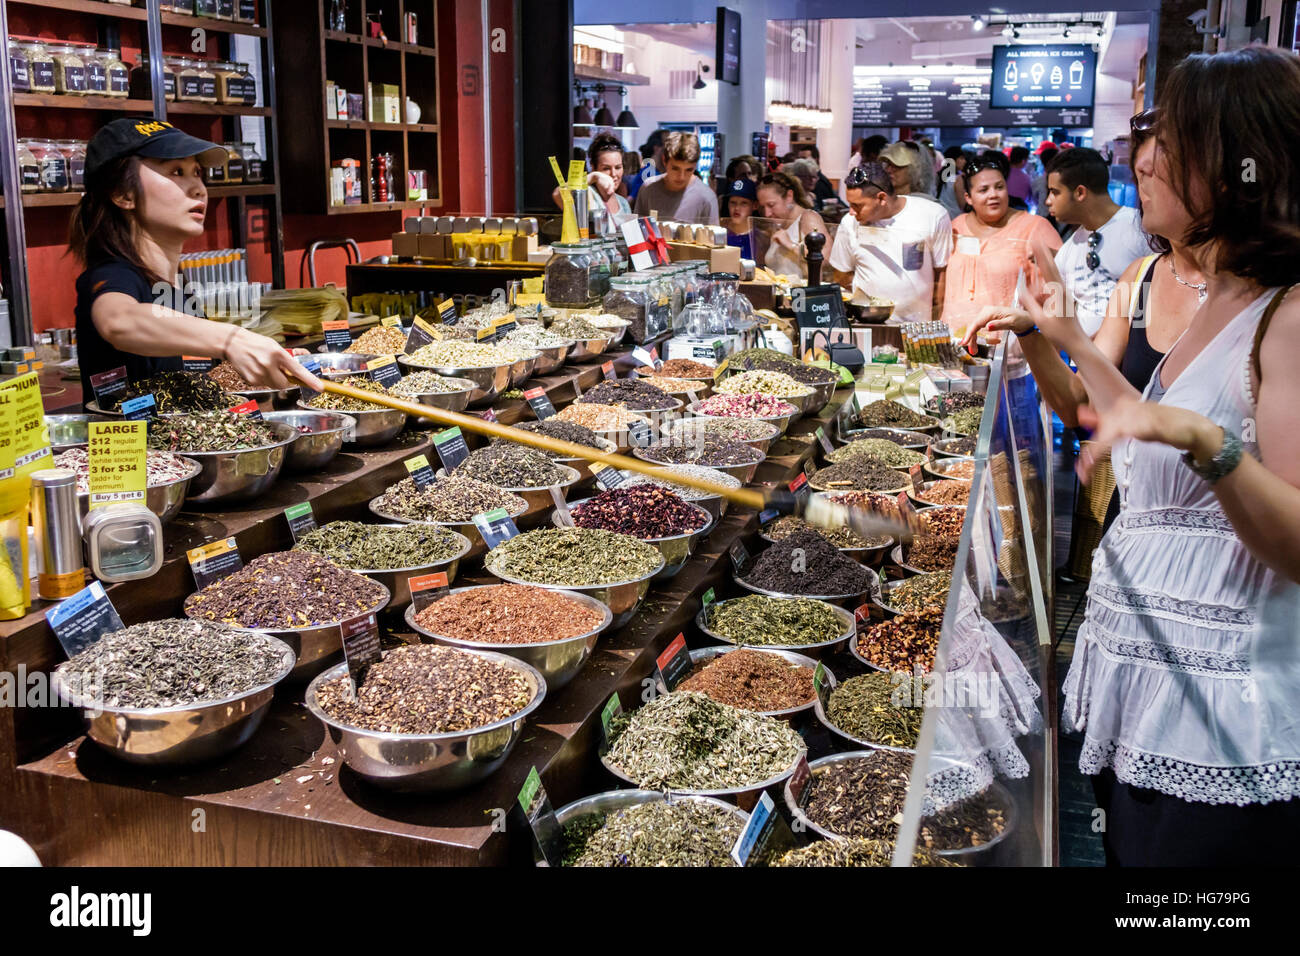 New York City,NY NYC Manhattan,Chelsea,Chelsea Market,Spices & Tease,spice store,loose leaf tea,display bowls,Asians adult adults,woman female women,w Stock Photo